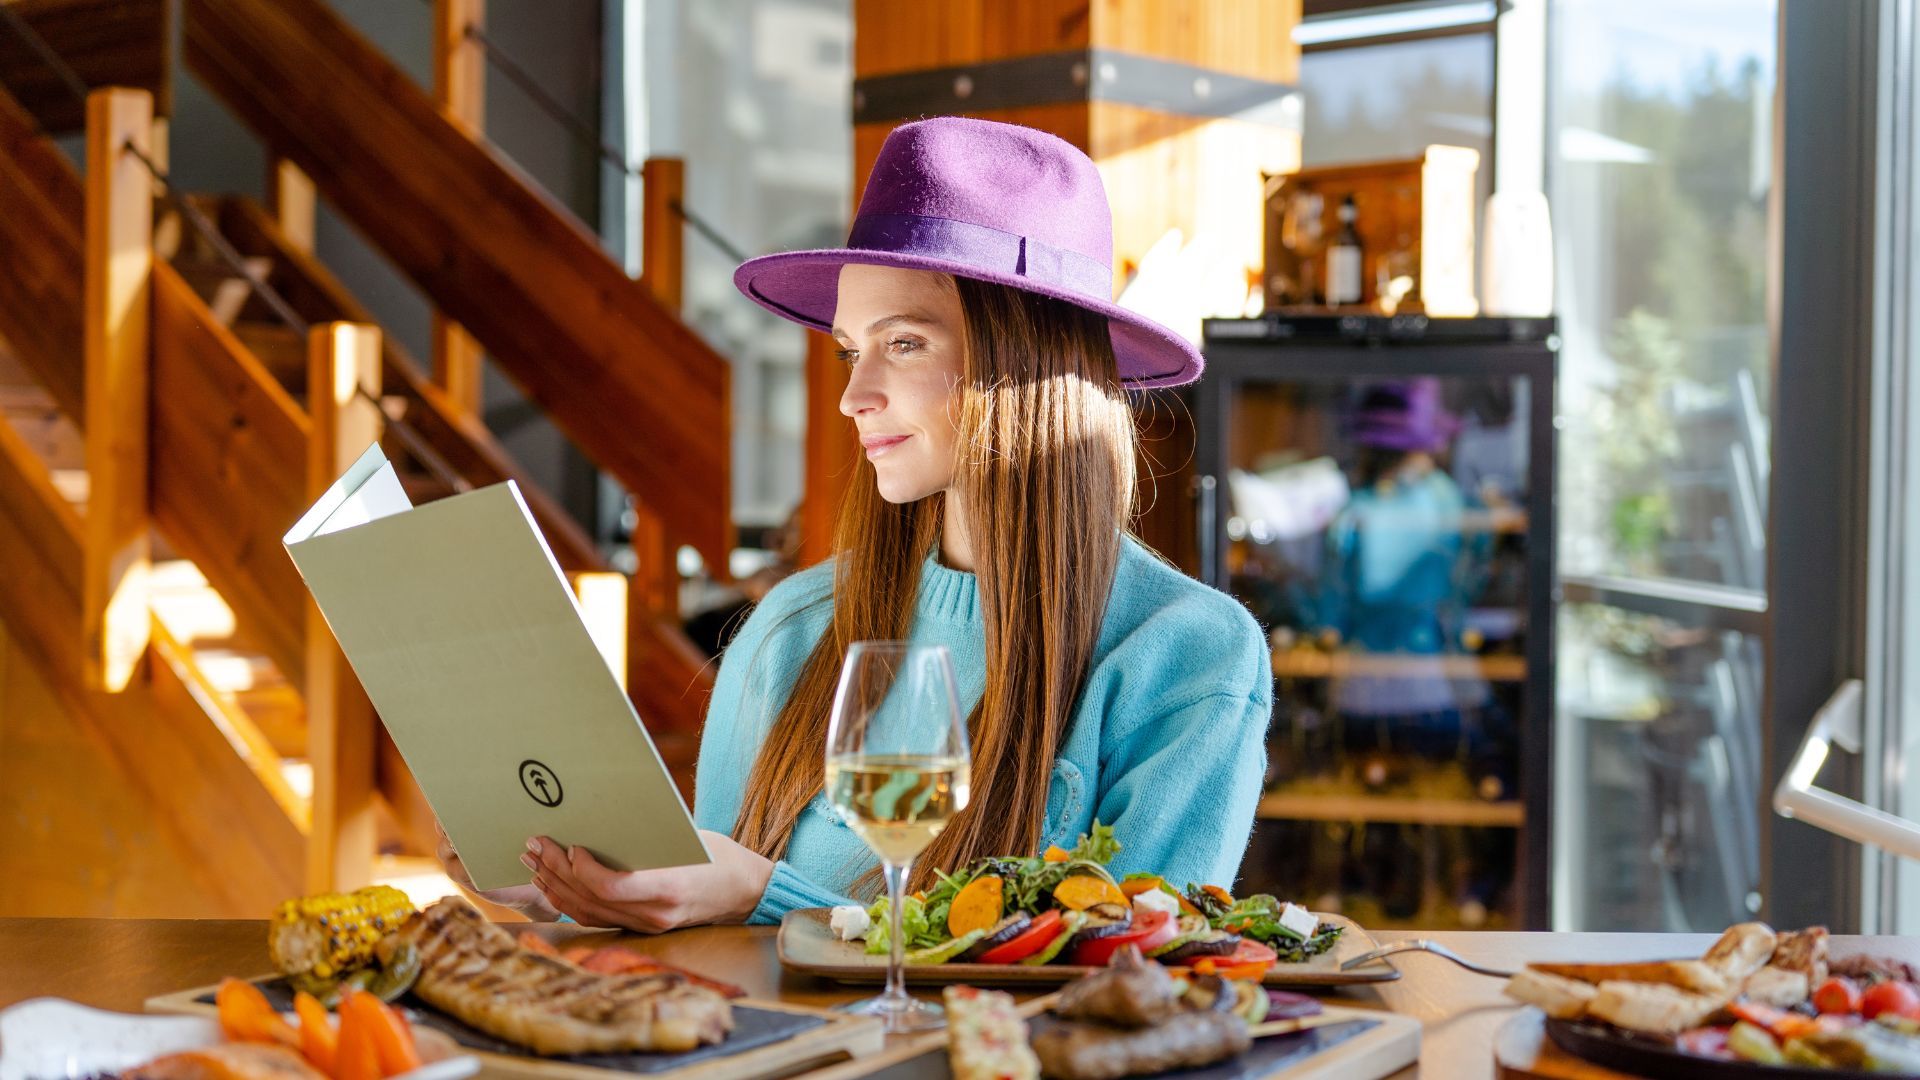 A Woman In A Purple Hat Holding A Laptop And A Glass Of Wine